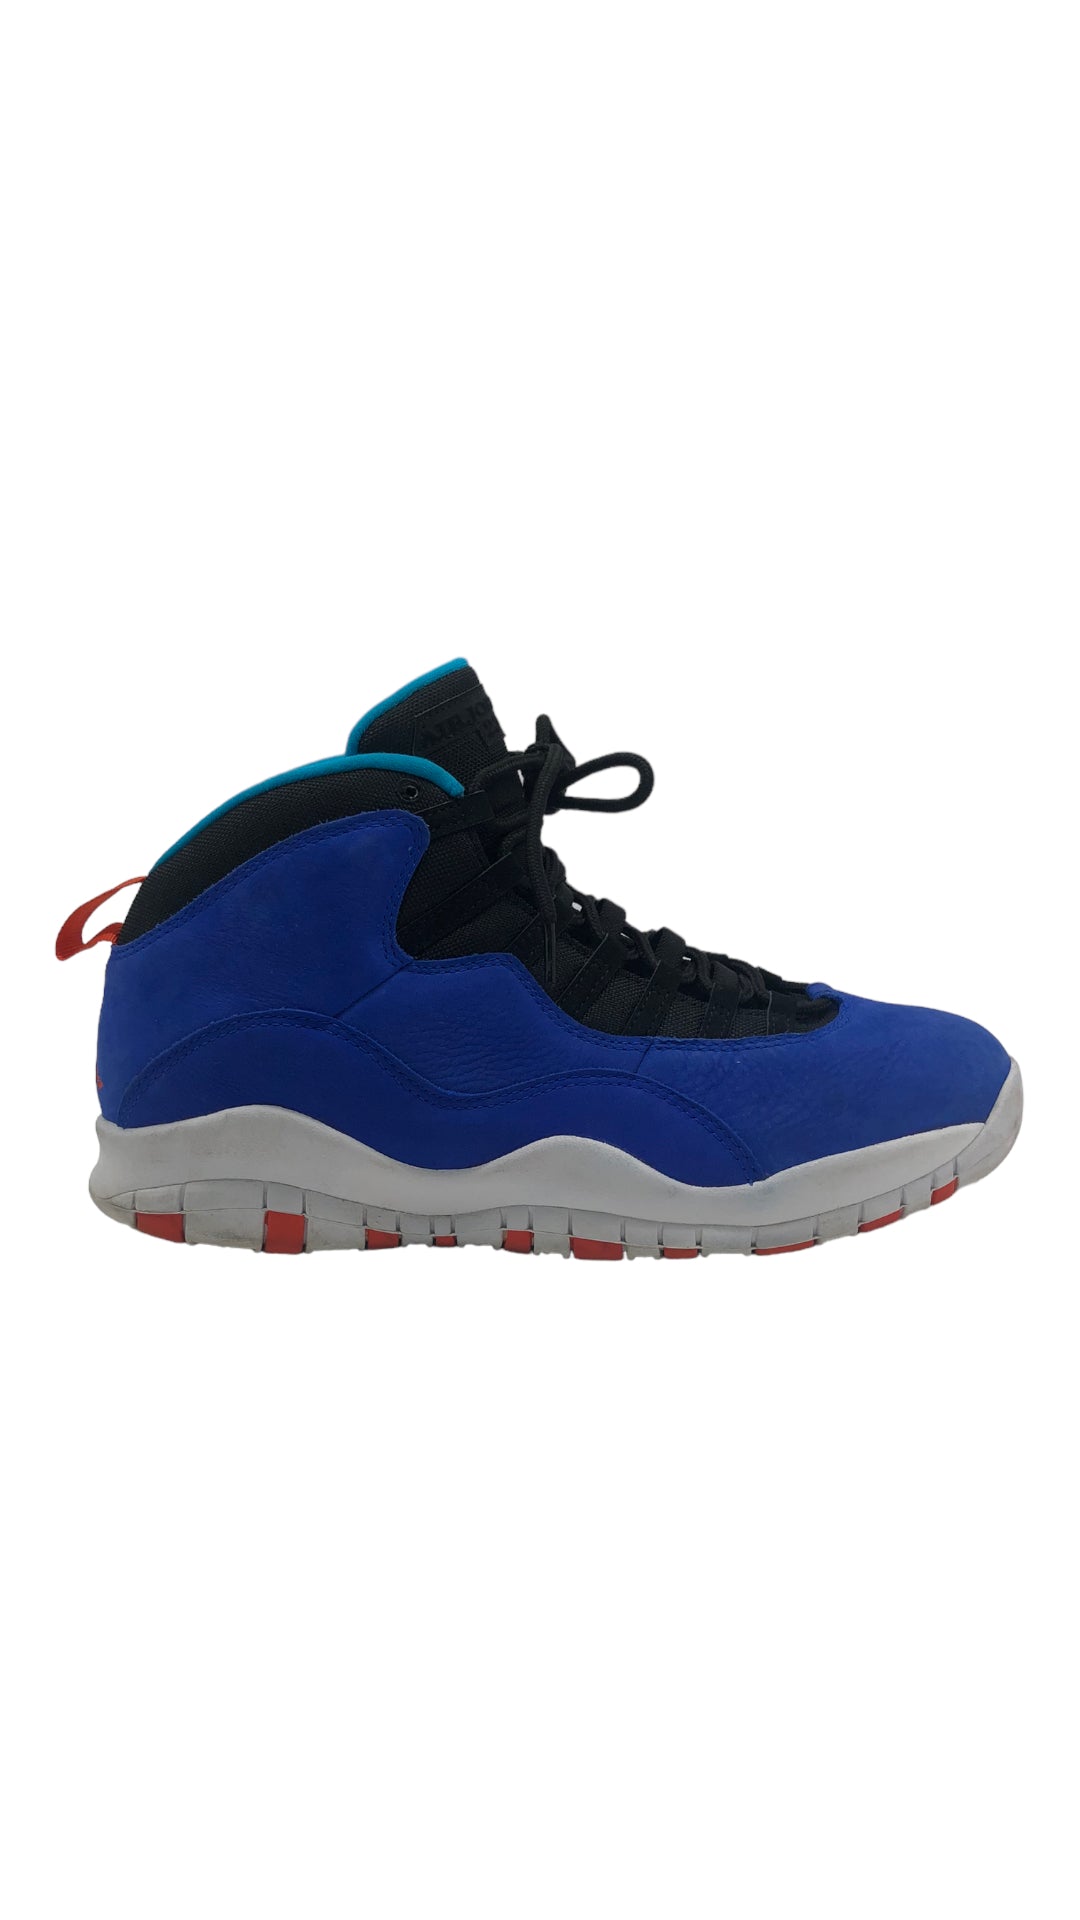 Load image into Gallery viewer, Preowned Jordan 10 Retro Tinker Sz 12M/13.5W
